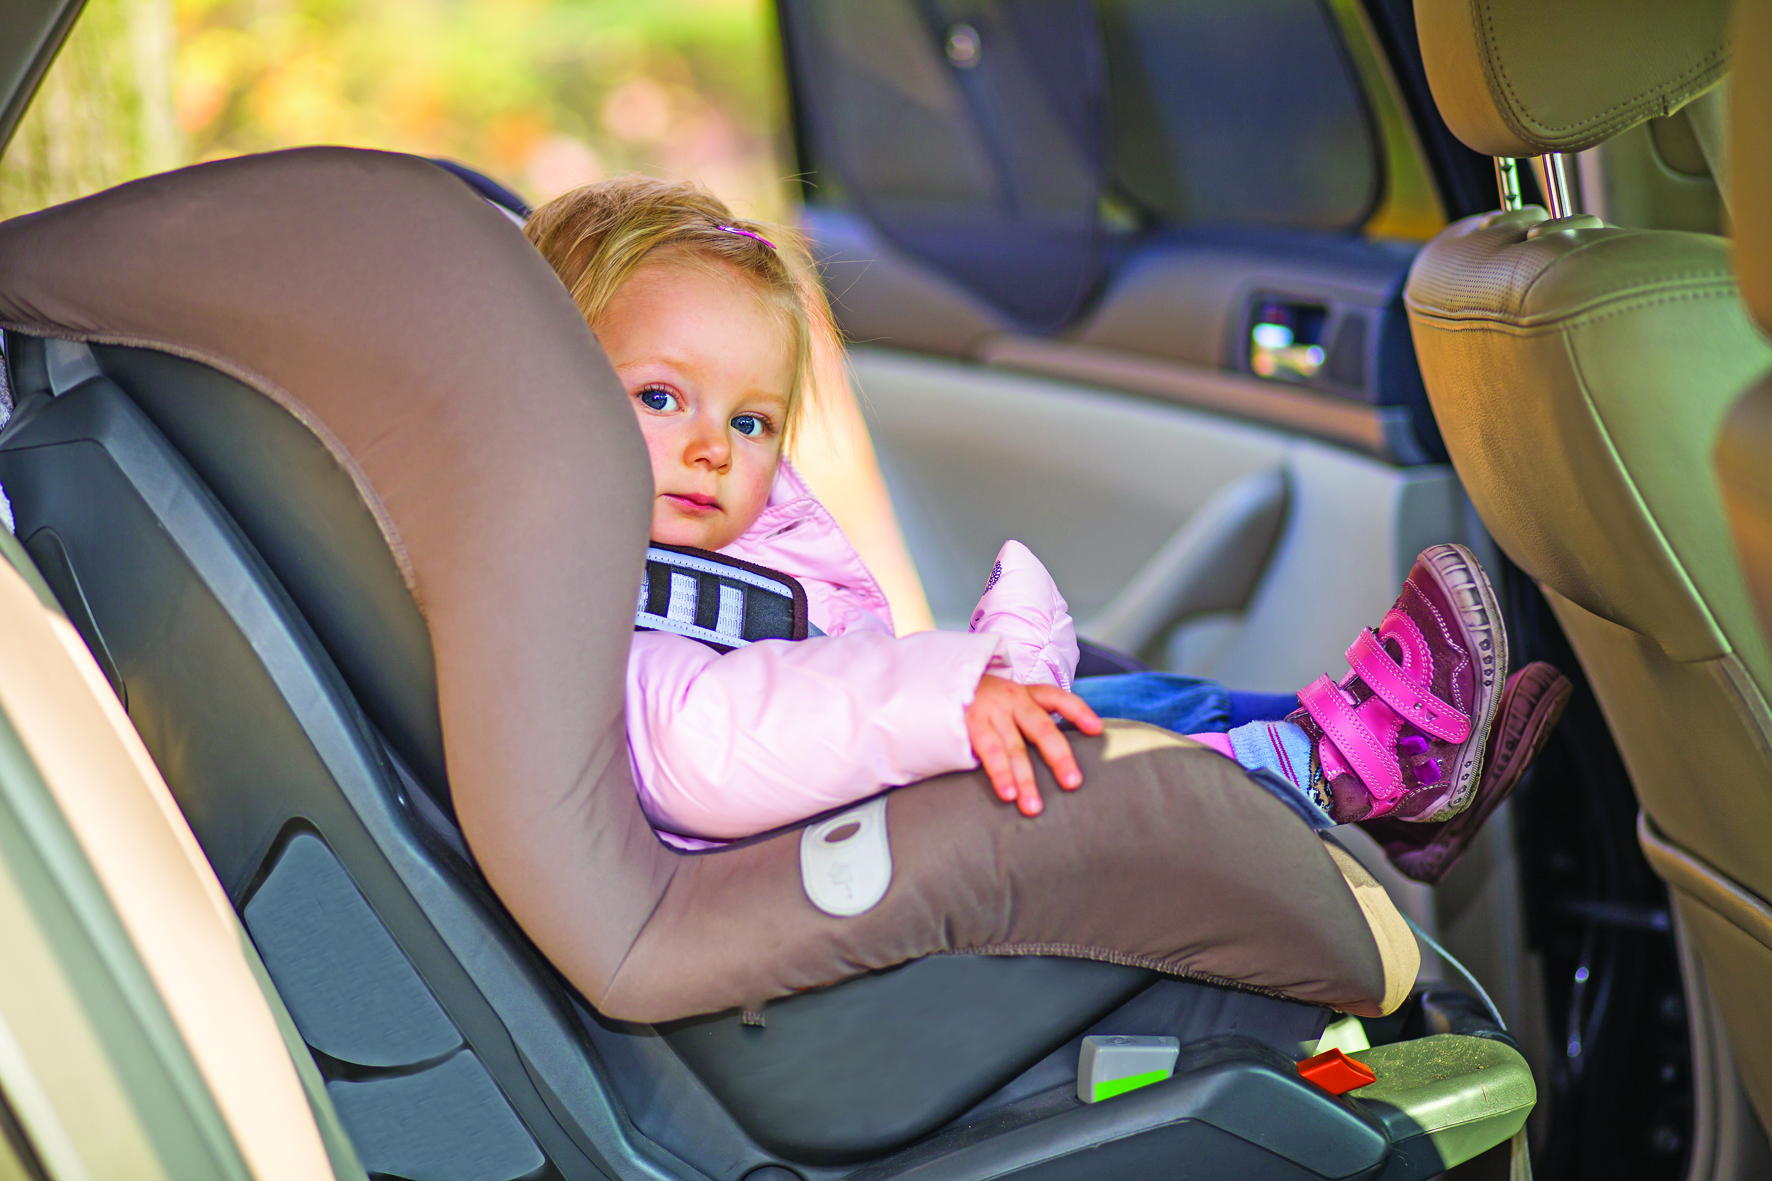 Safety experts in Oman advise use of special car seats for children